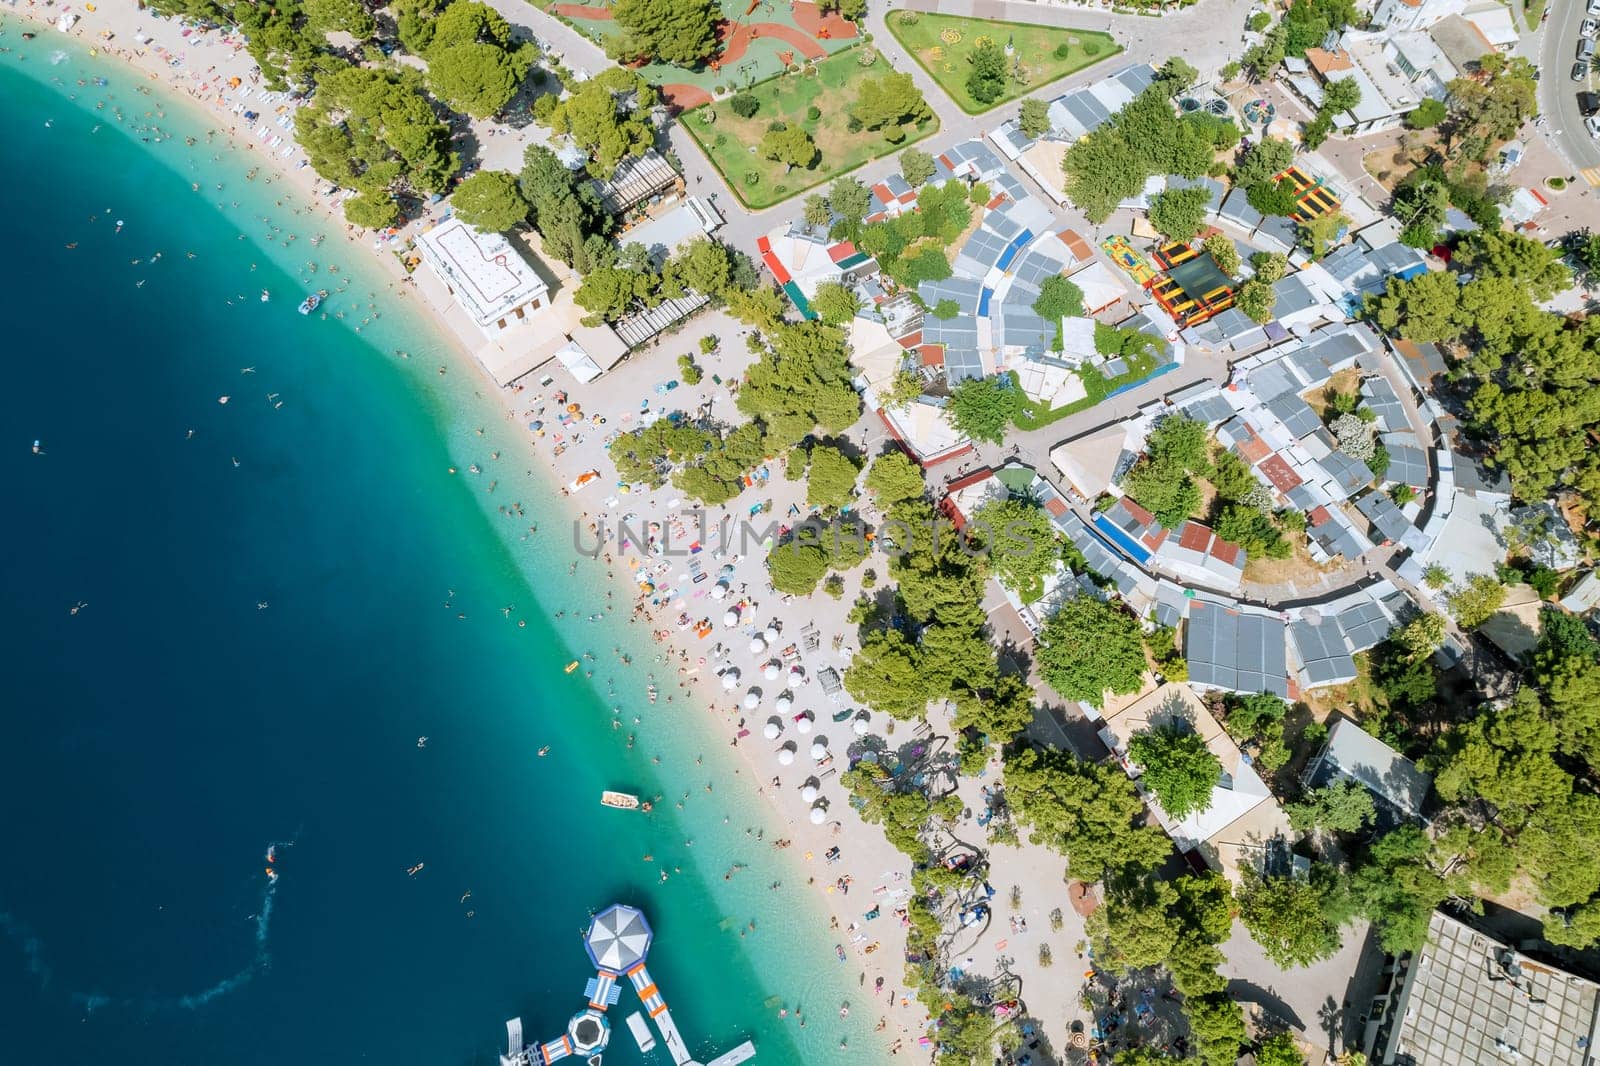 Adriatic Sea offers perfect setting for water sports like sailing, windsurfing, and kayaking. Coastal town of Makarska is famous for its beautiful beaches along Adriatic Sea.